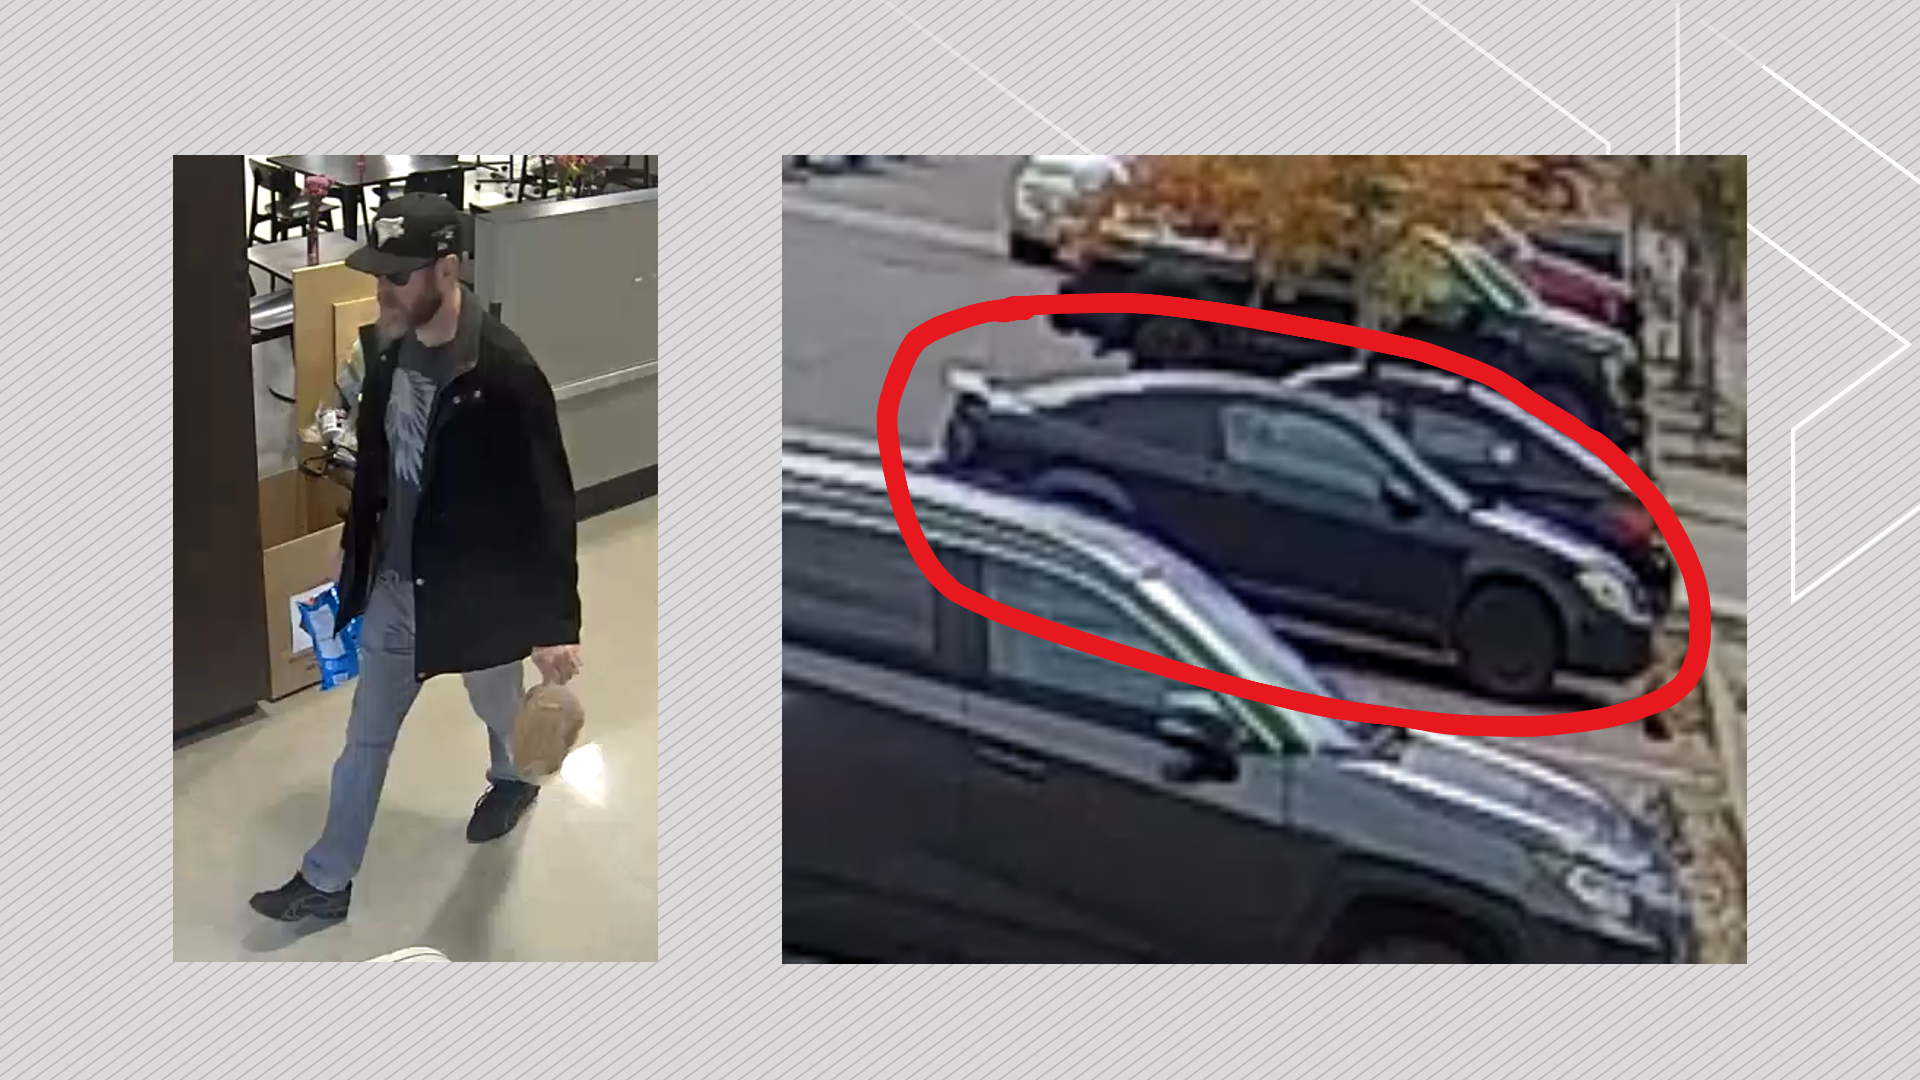 Calgary police release photo of car suspected in hit and run that hospitalized senior